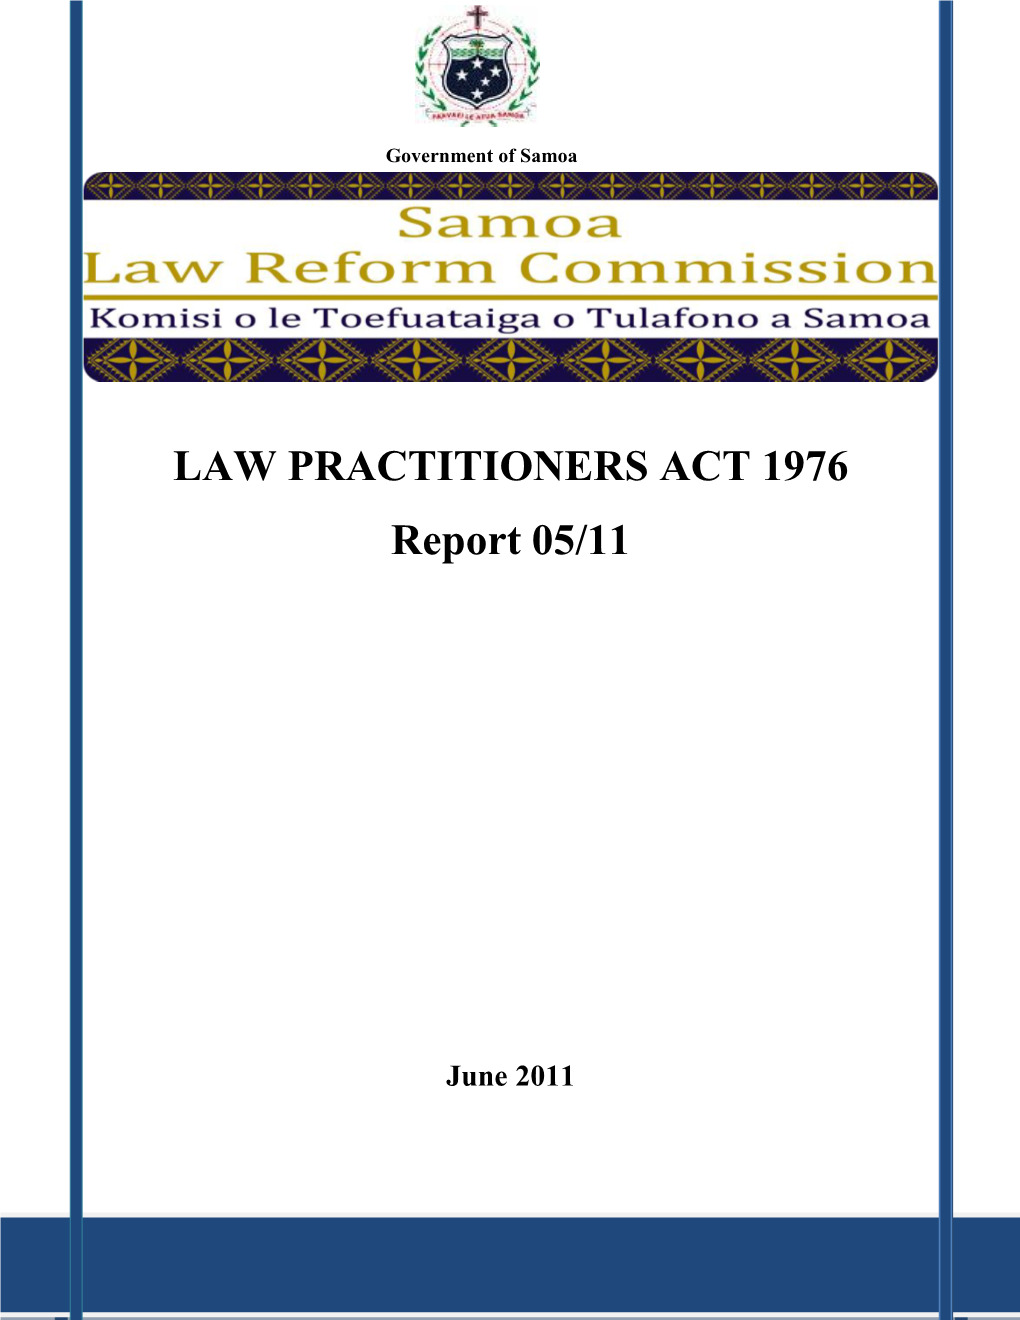 Law Practitioners Act 1976 Final Report